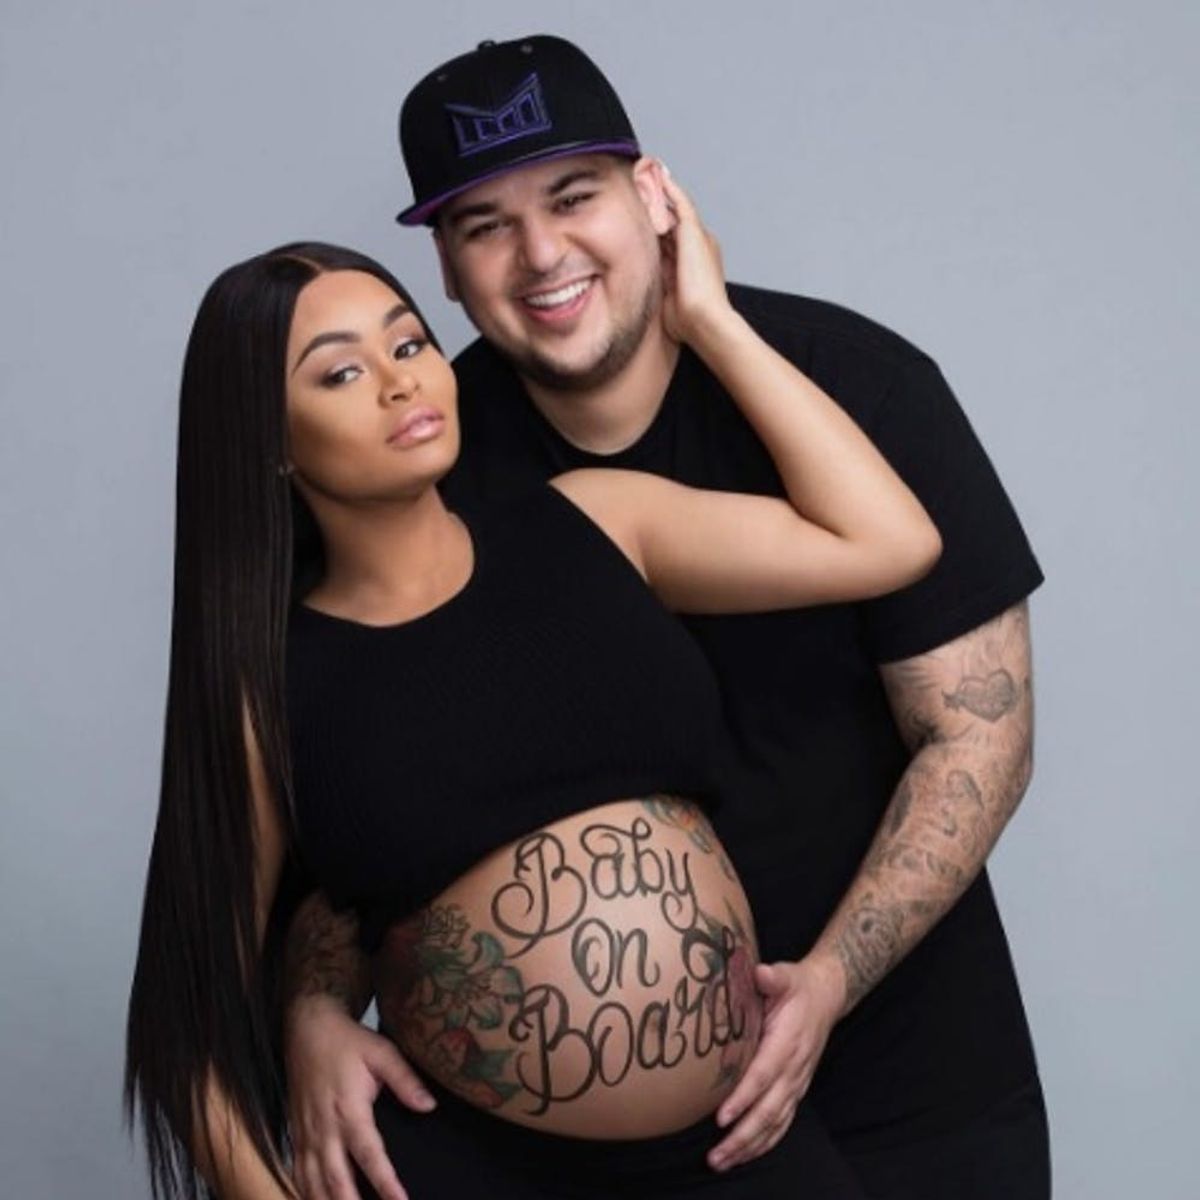 Rob K Tweets Kylie’s Cell Phone Number As They Fight Over Blac Chyna’s Baby Shower